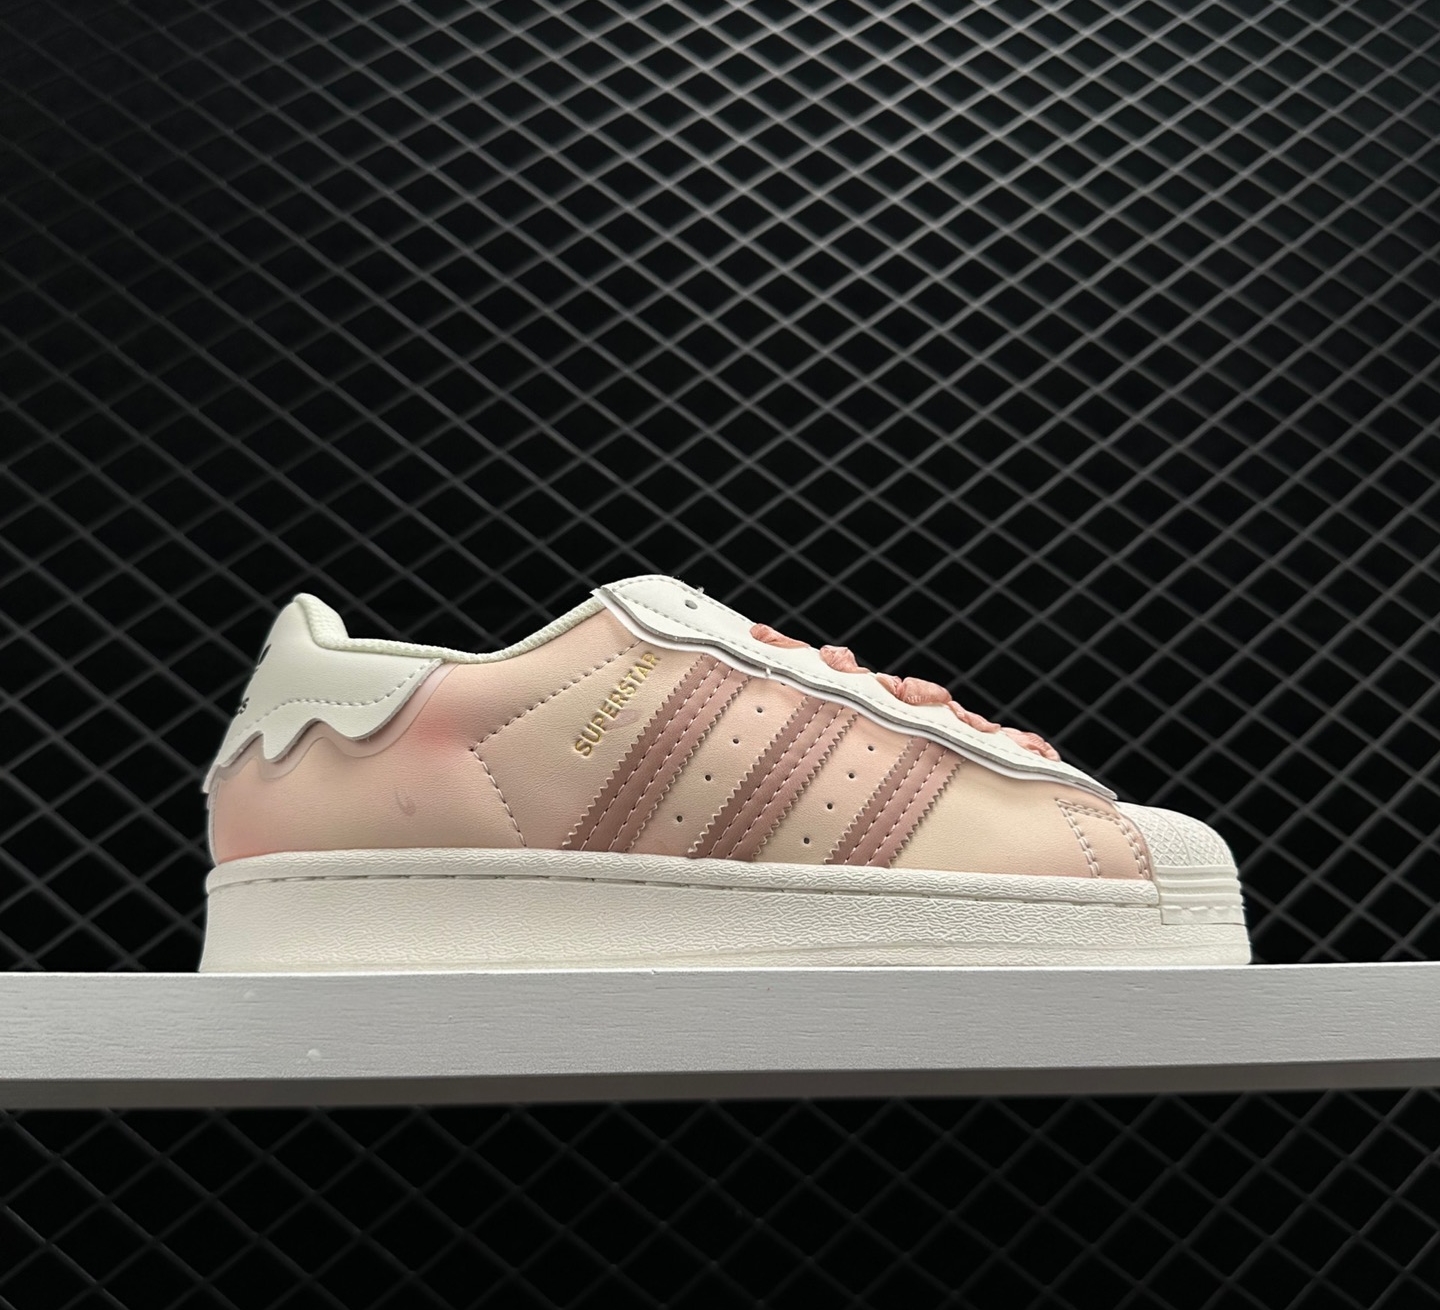 Adidas Originals Superstar Cloud White Pink Core Black - Stylish and Trendy Sneakers